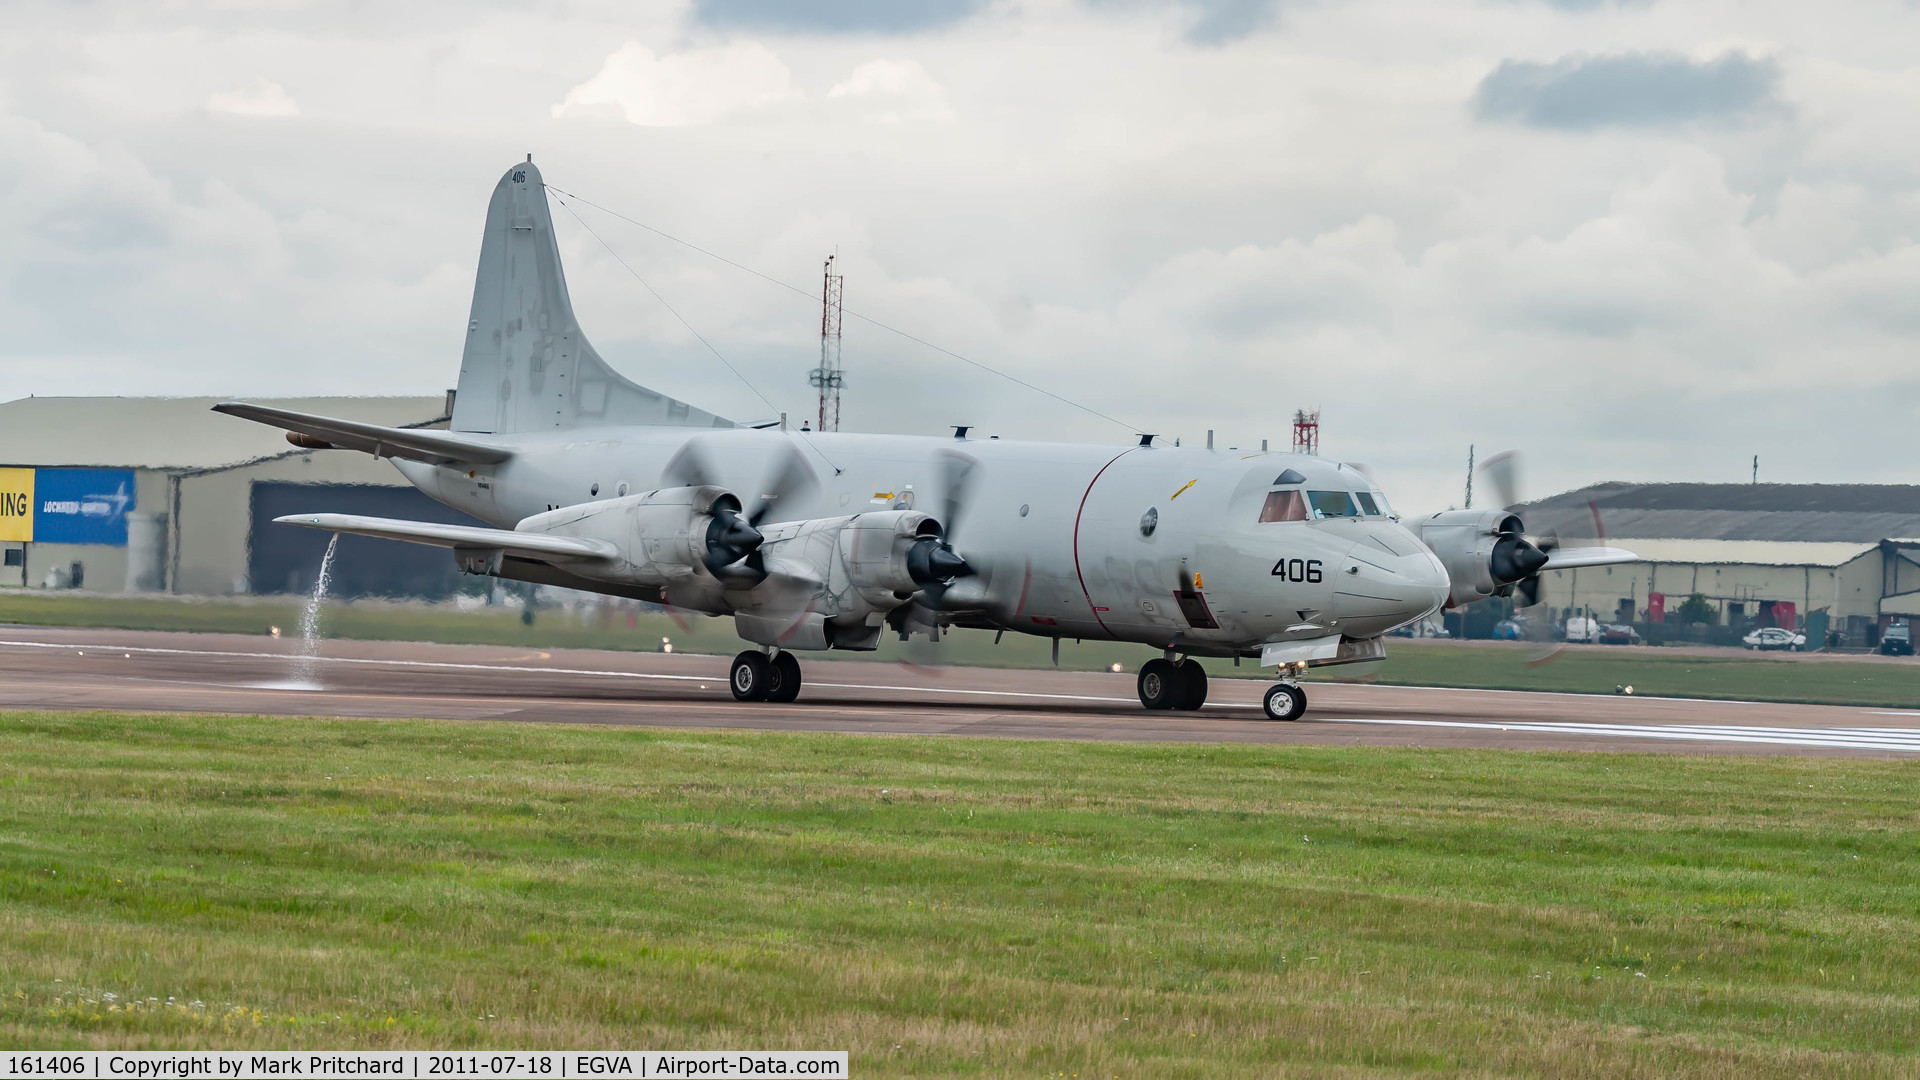 161406, Lockheed P-3C Orion C/N 285A-5743, RIAT 2011 with either a fuel or water leak